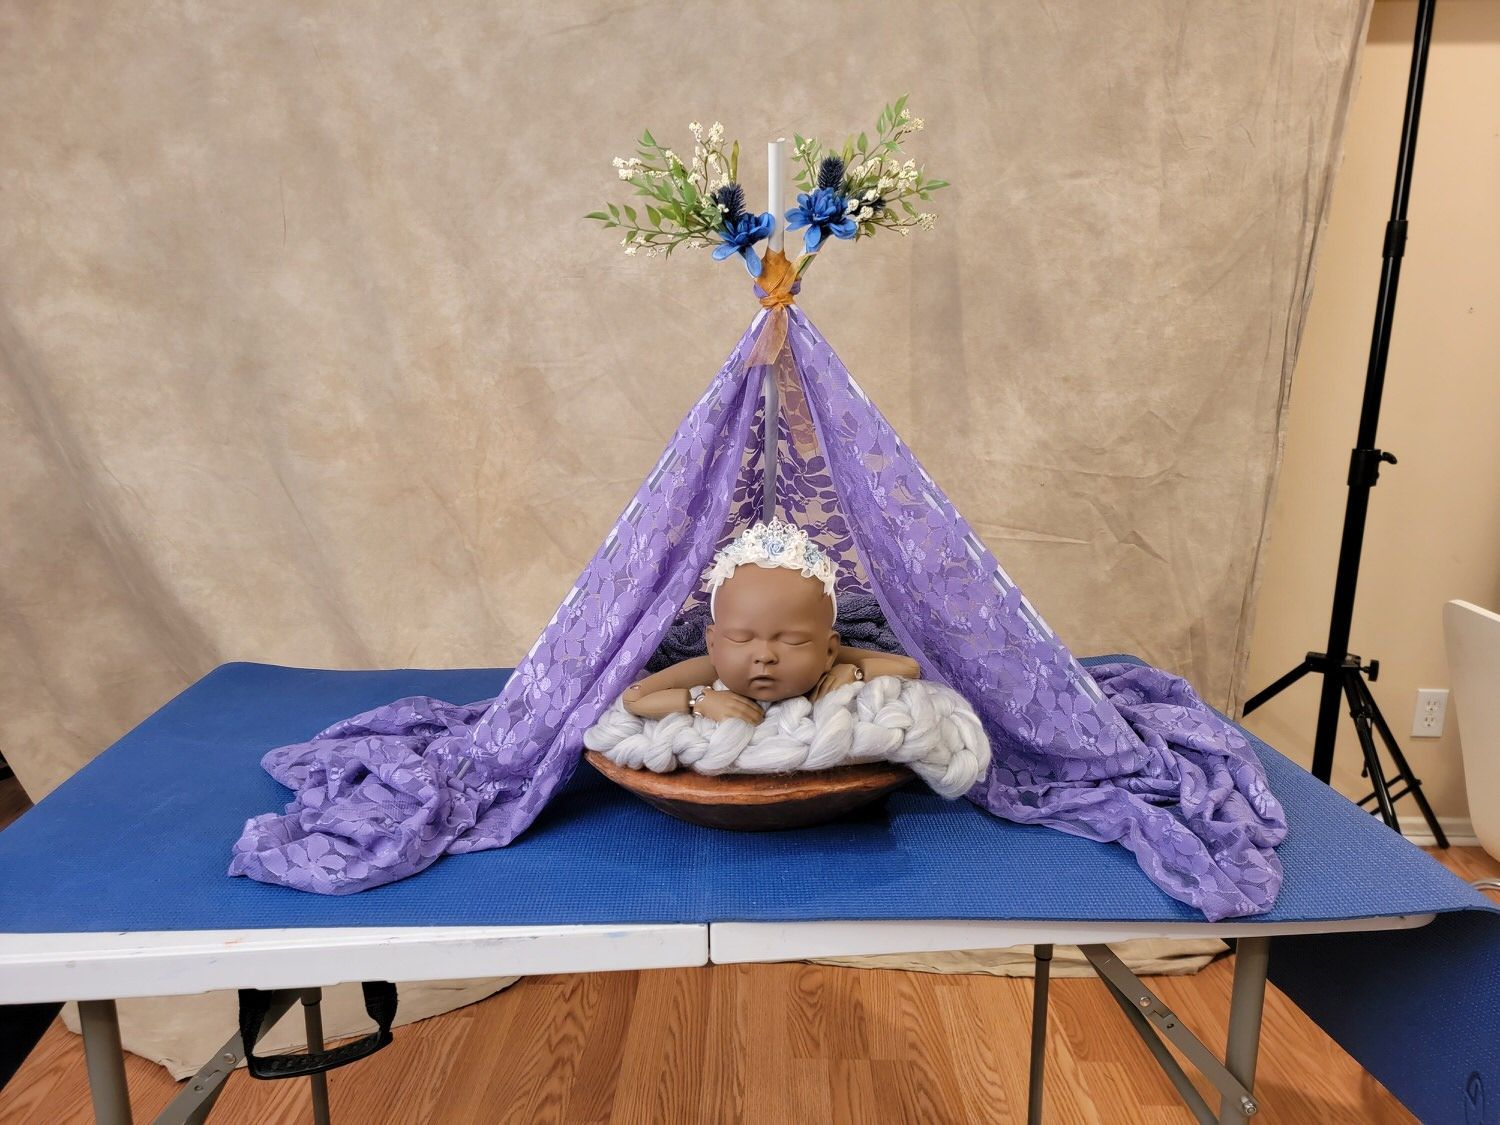 Boho tent for newborn photos make with an old flat curtain rod.